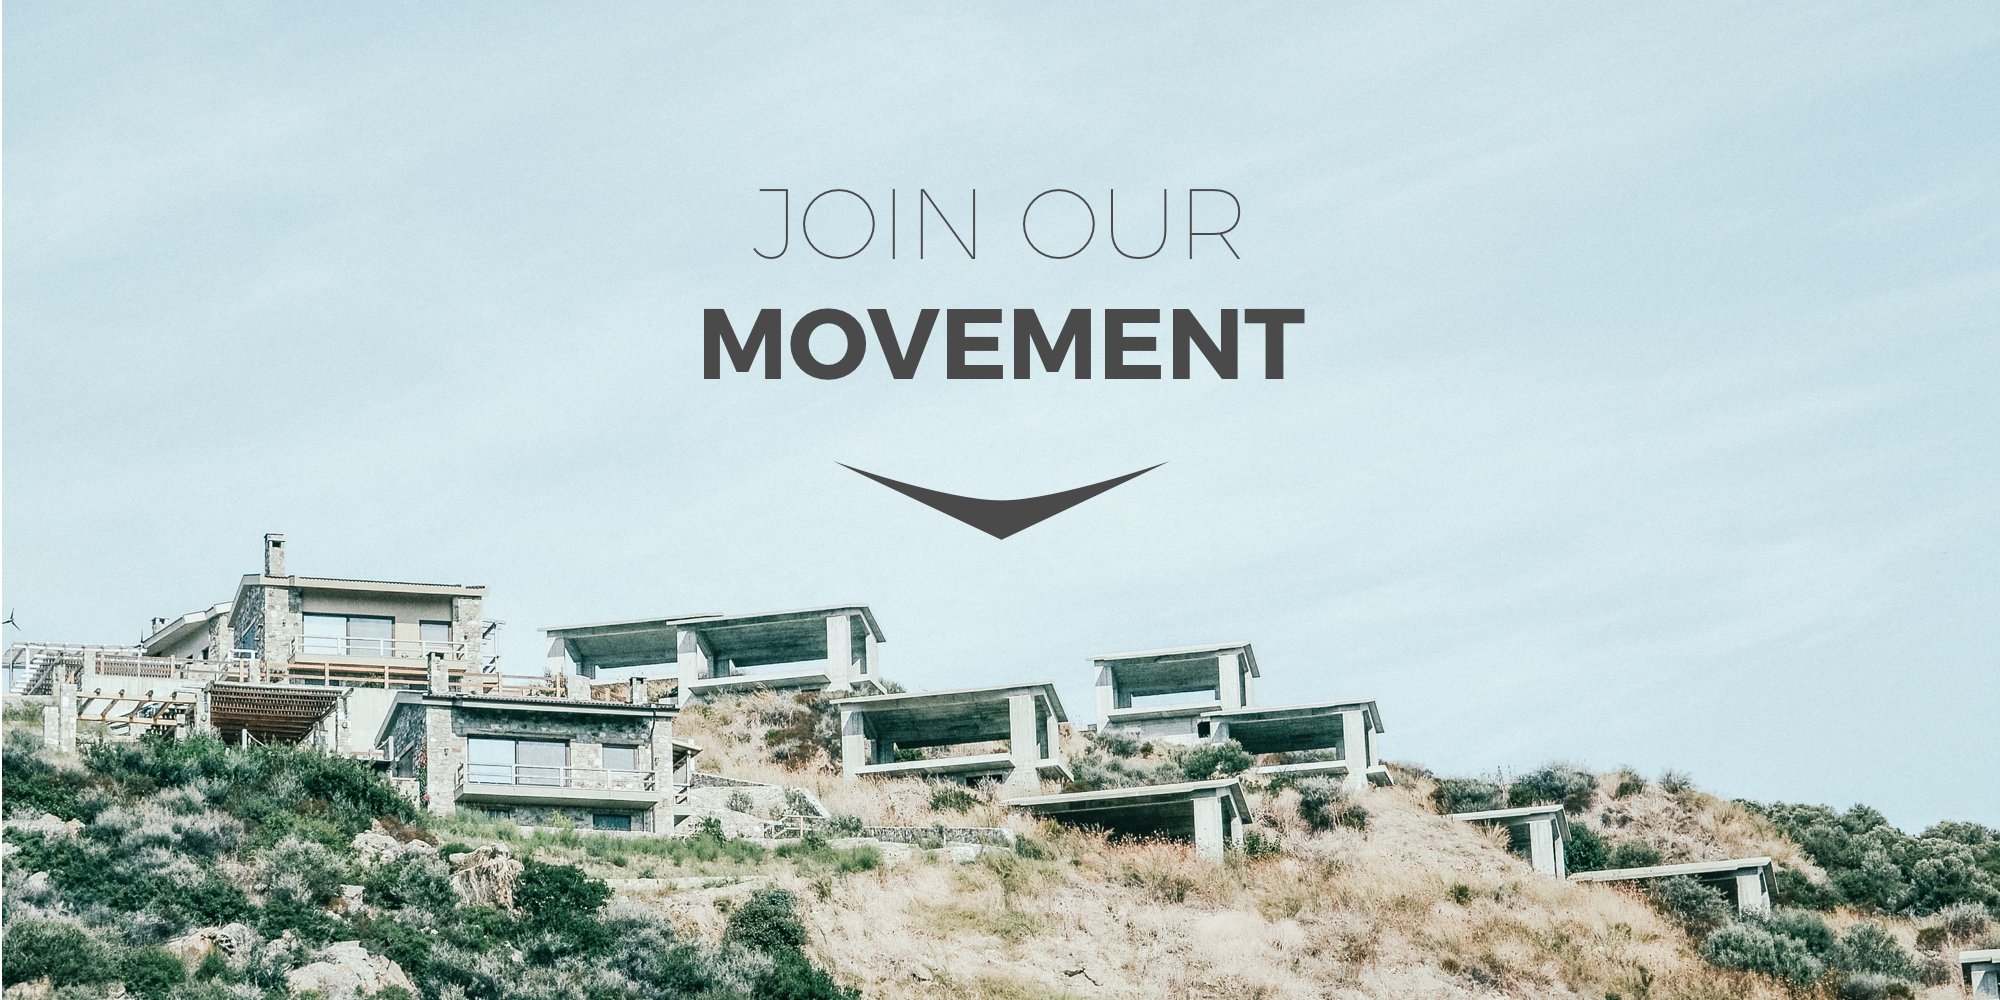 JOIN OUR MOVEMENT